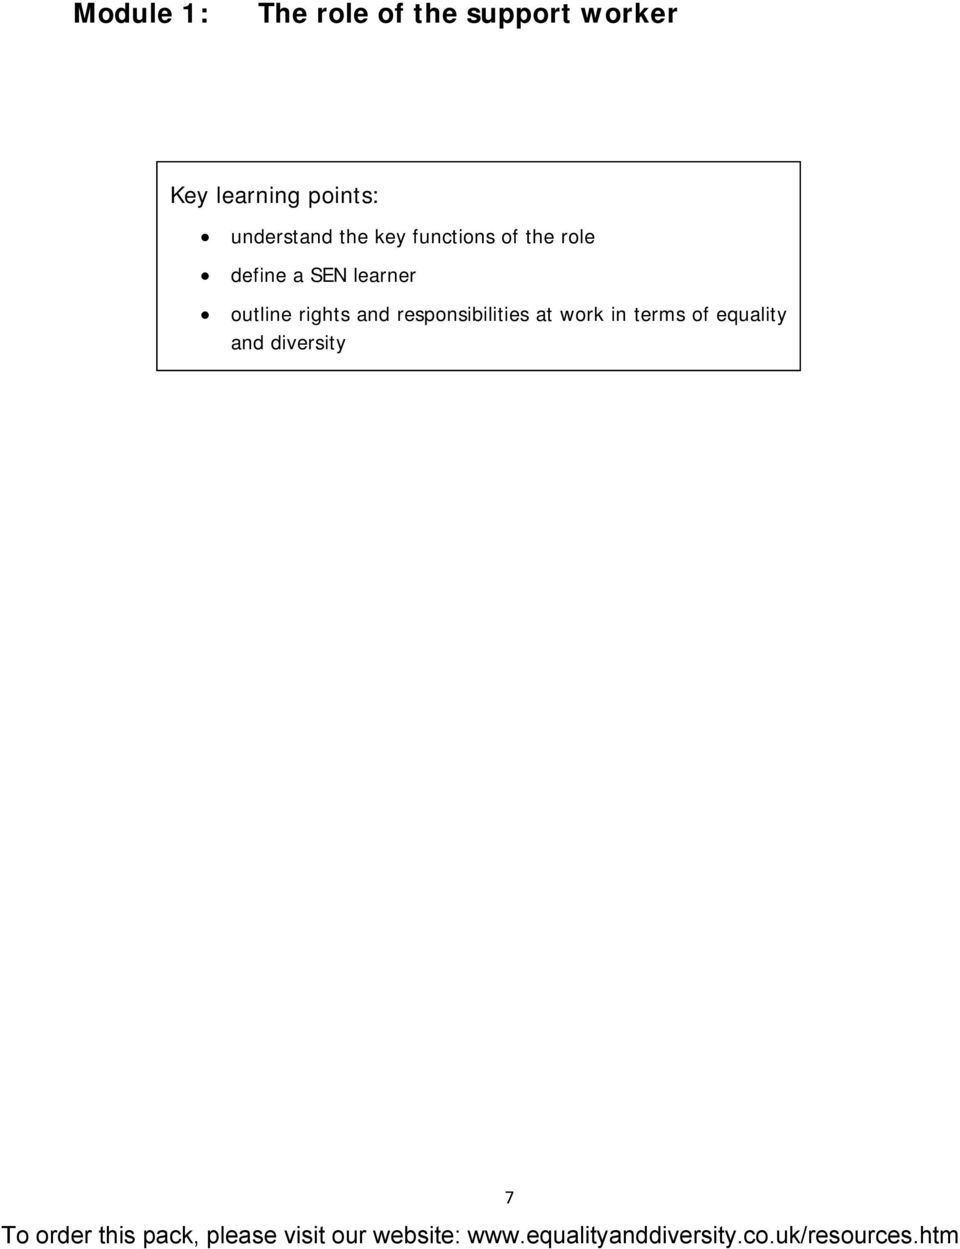 the role define a SEN learner outline rights and